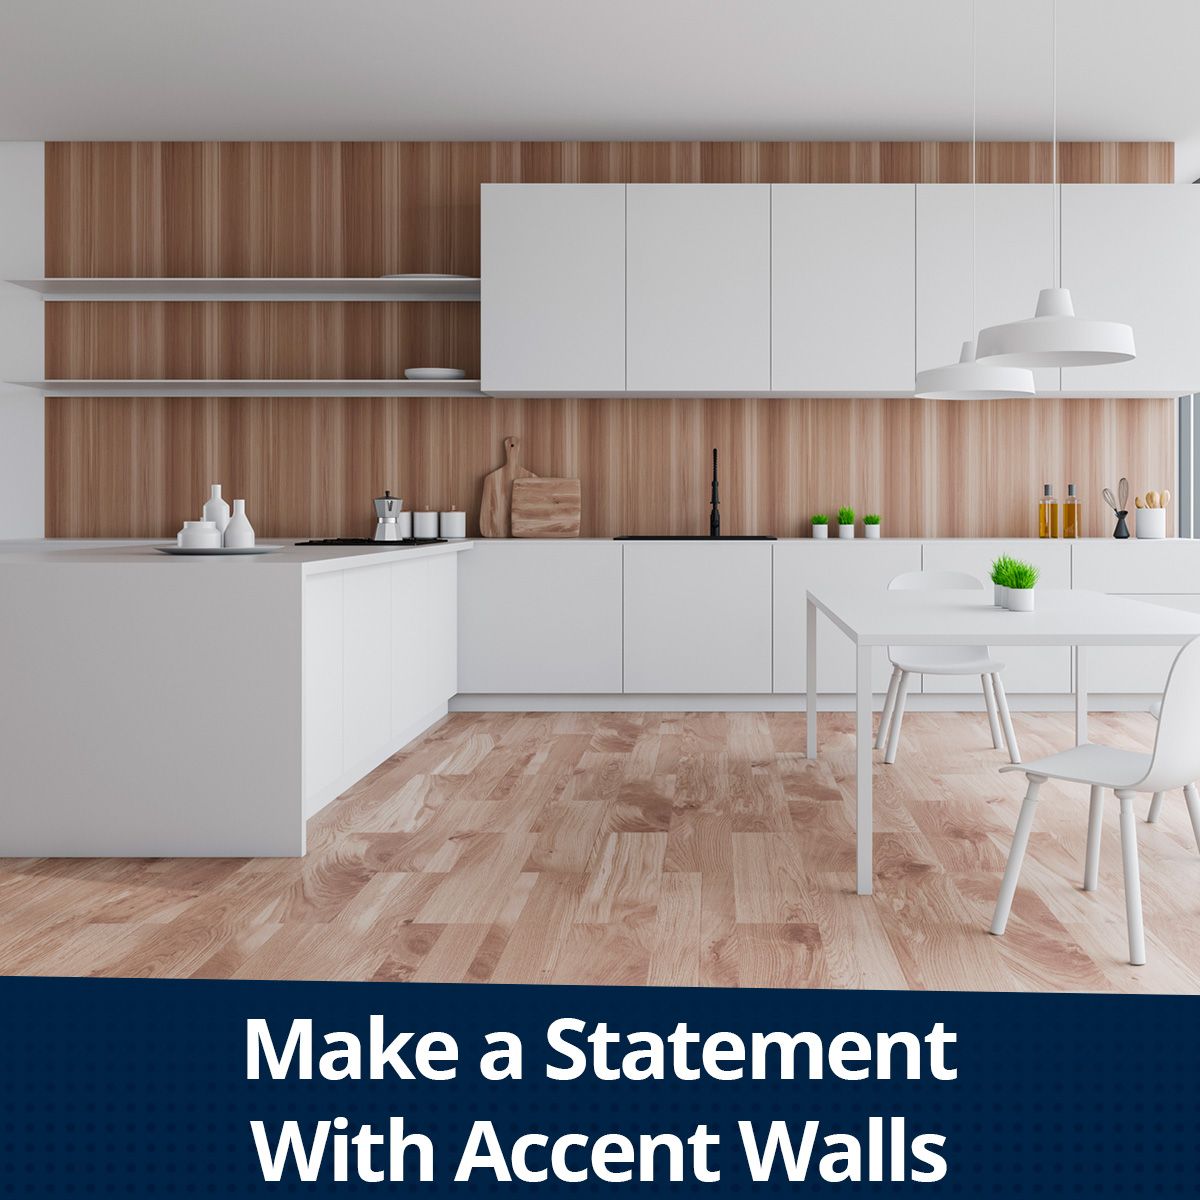 Make a Statement With Accent Walls